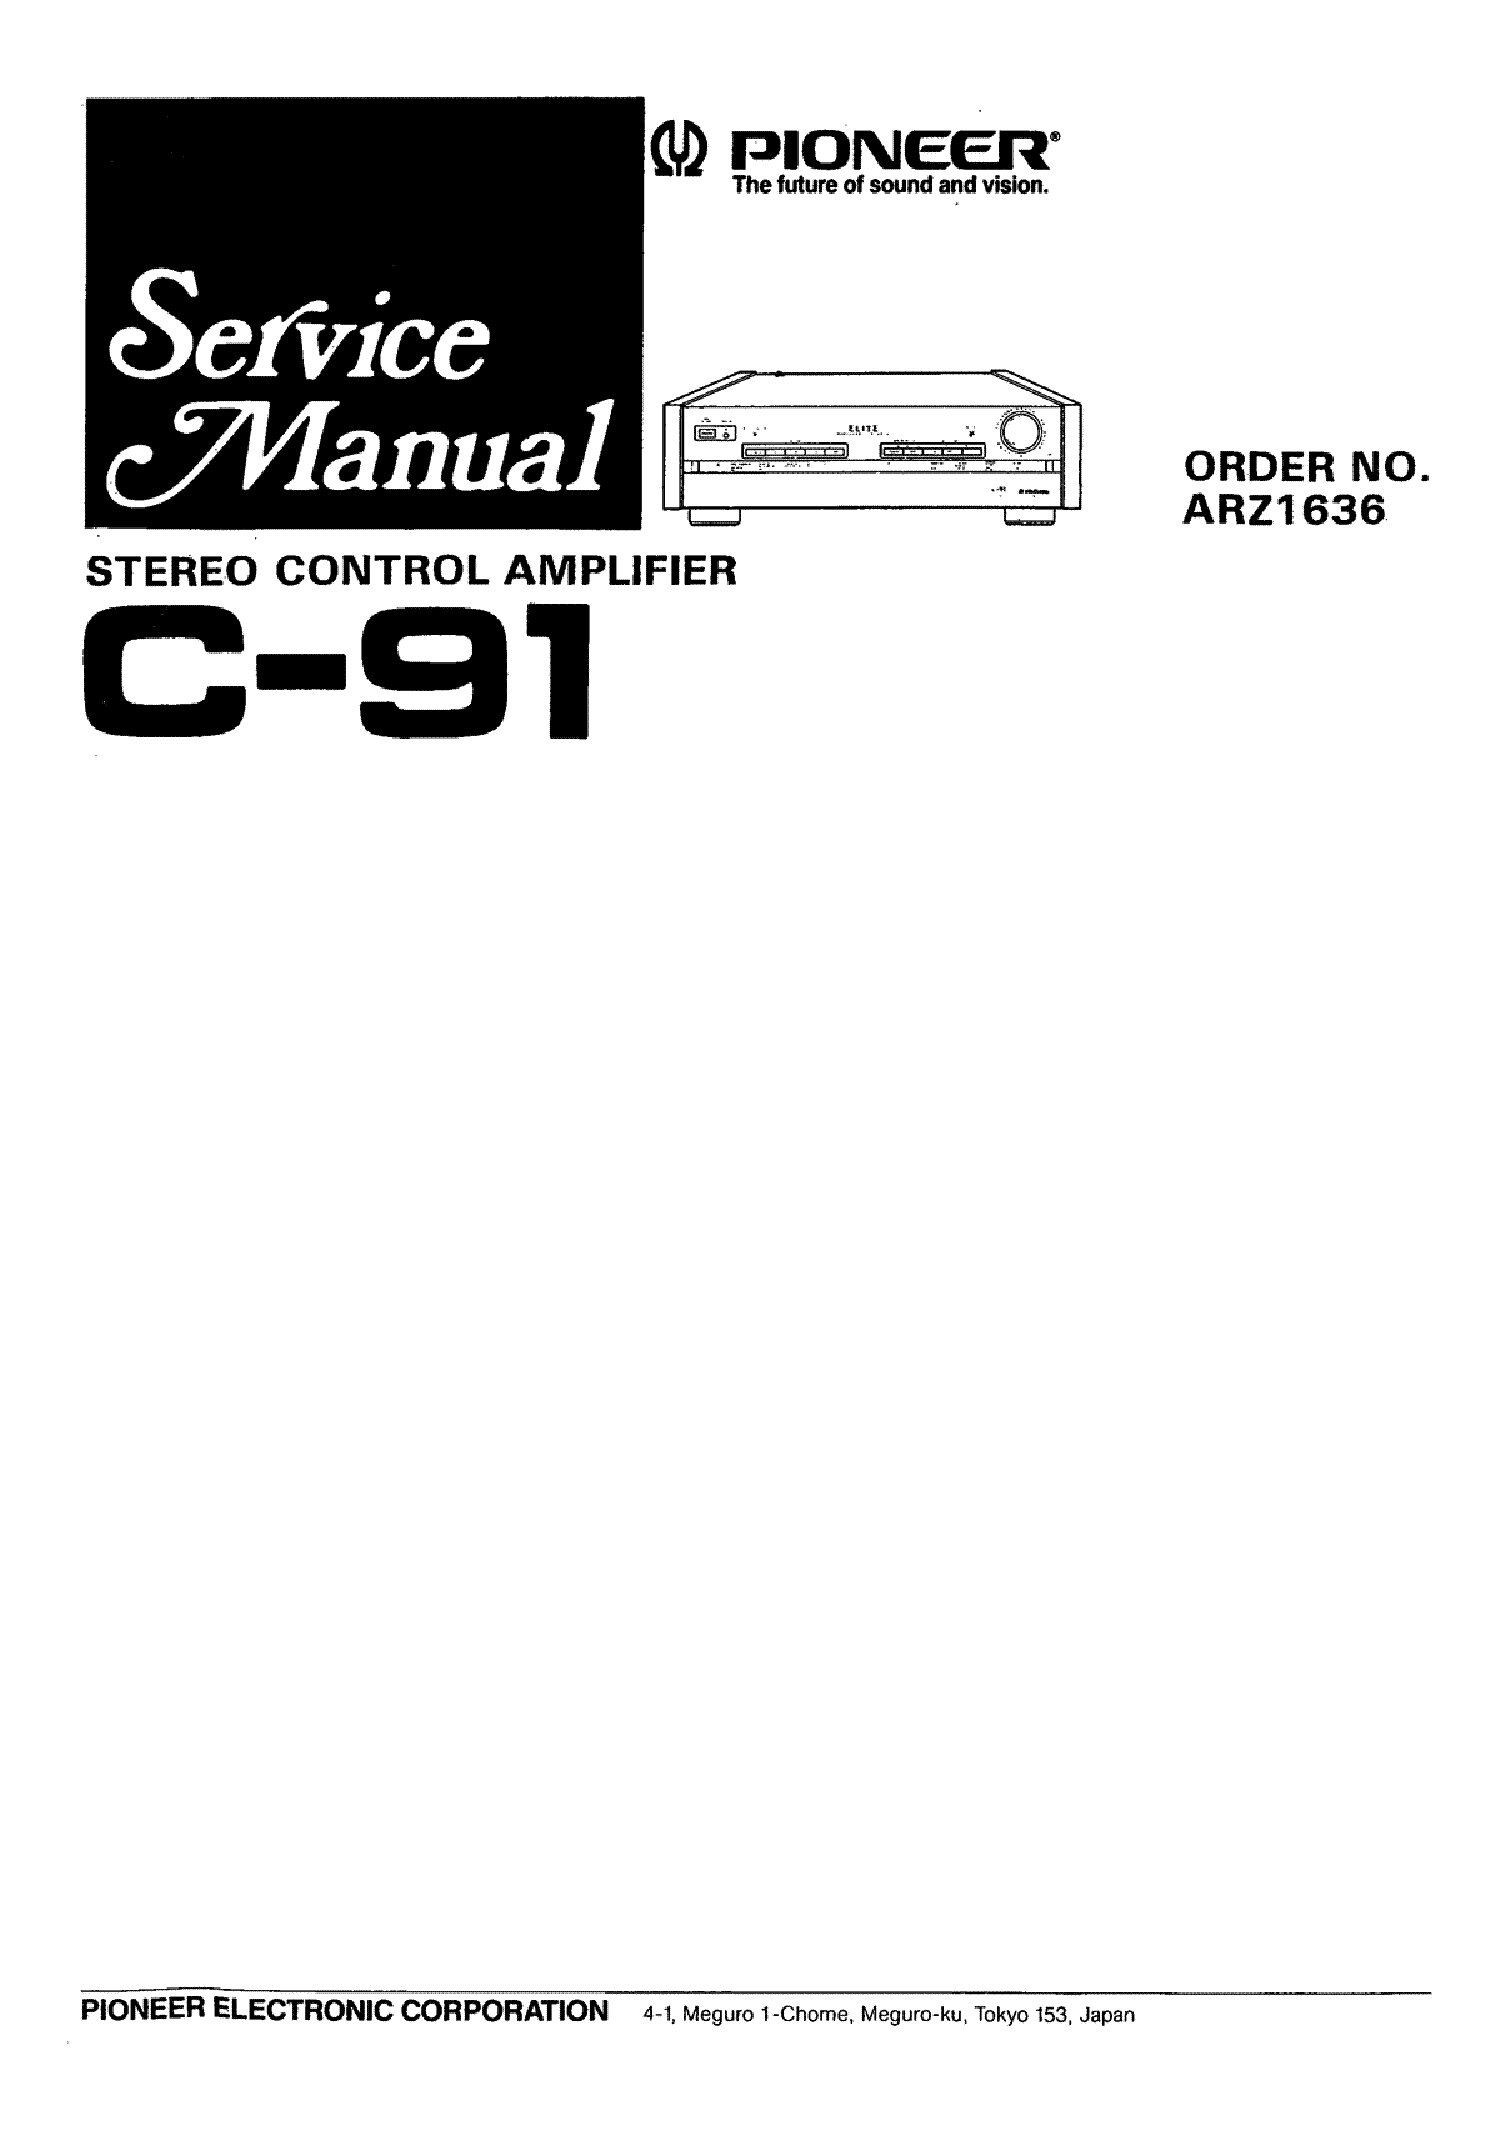 PIONEER C91 service manual (1st page)